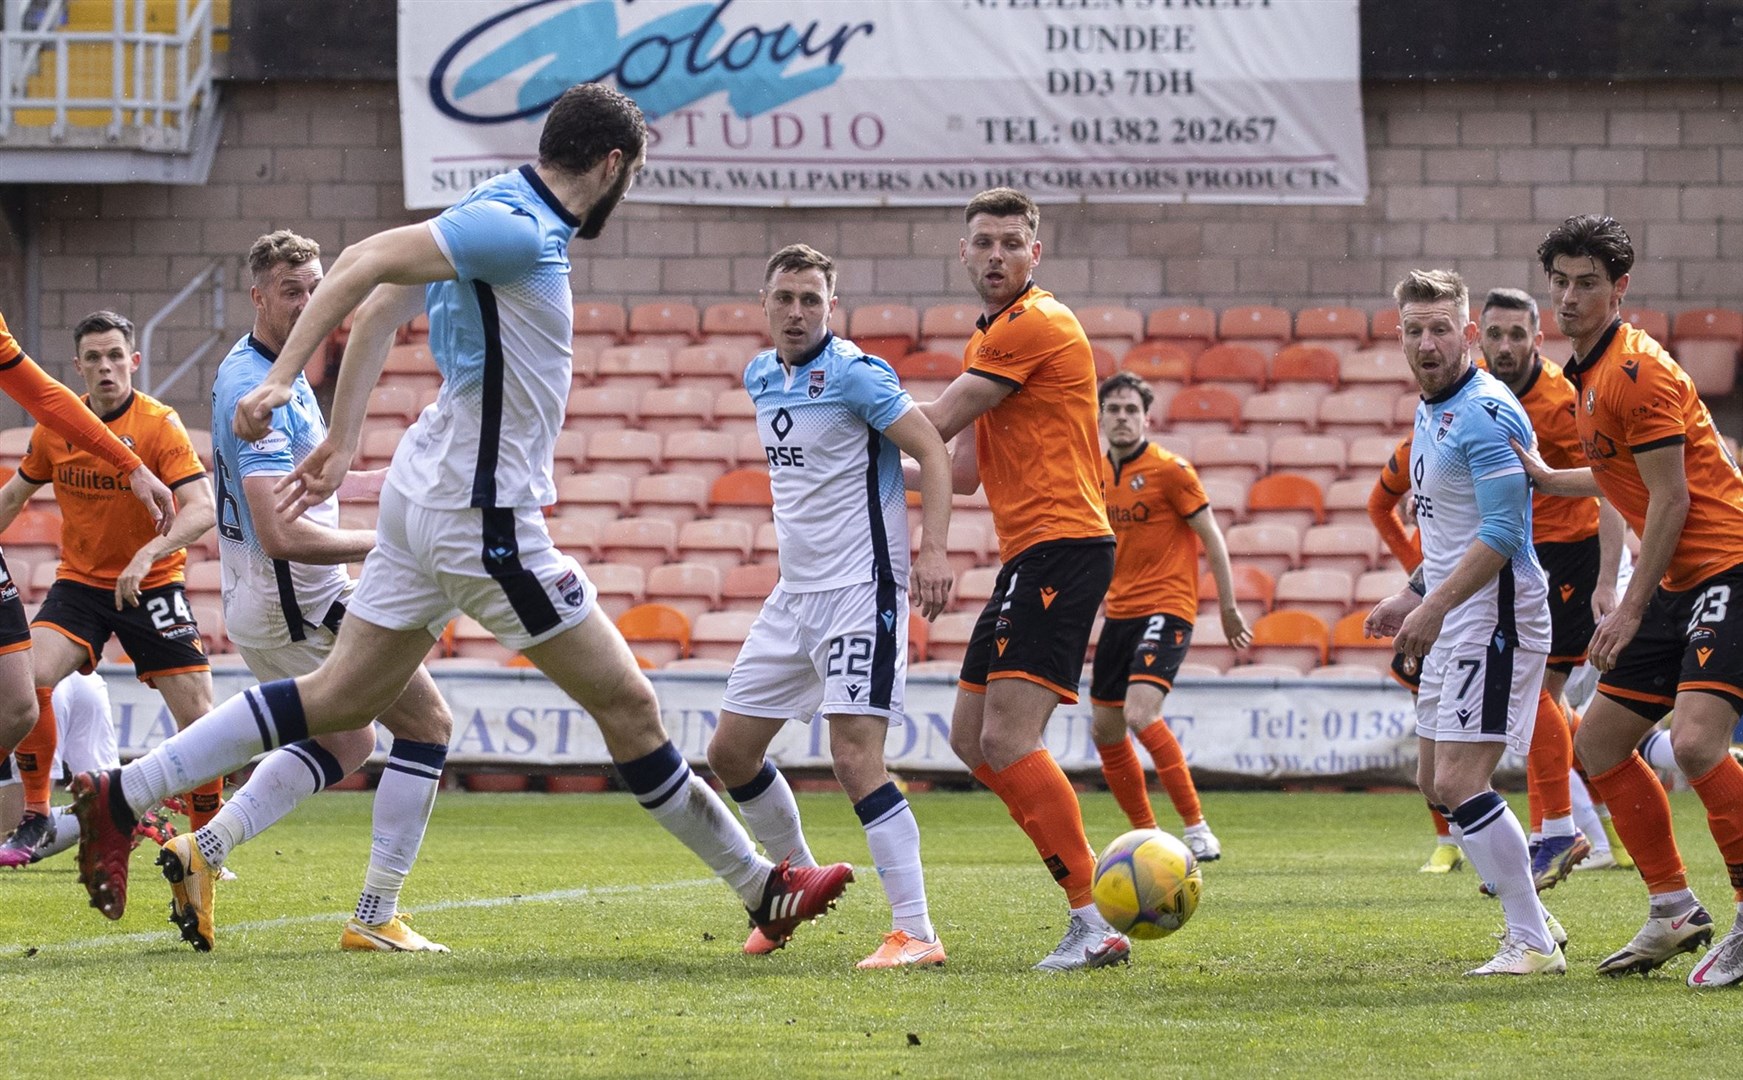 Picture - Ken Macpherson, Inverness. Dundee Utd(0) v Ross County(2). 01.05.21. Ross County's Alex Iacovitti perfectly side-foots the 2nd goal past Dundee Utd 'keeper Deniz Mehmet.